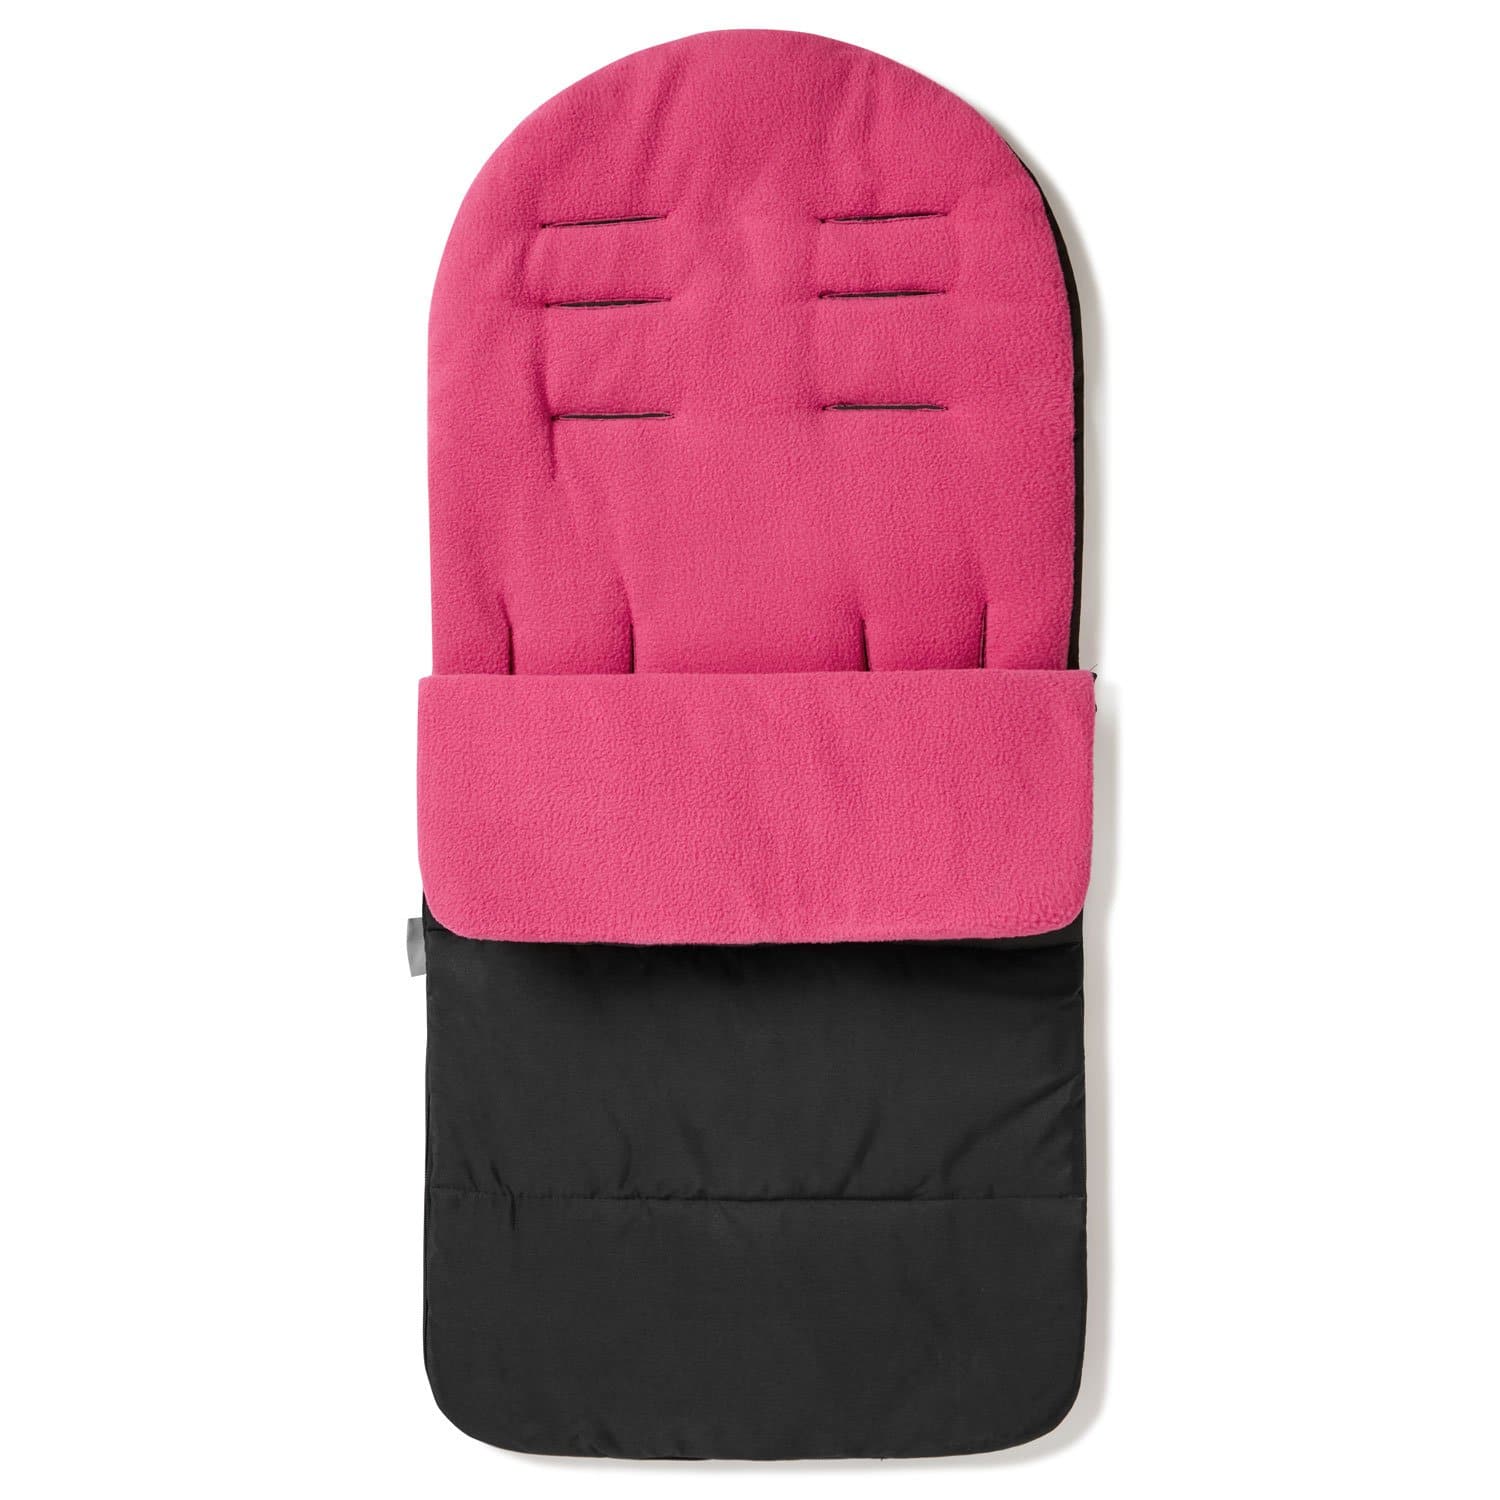 Premium Footmuff / Cosy Toes Compatible with Tippitoes - Pink Rose / Fits All Models | For Your Little One